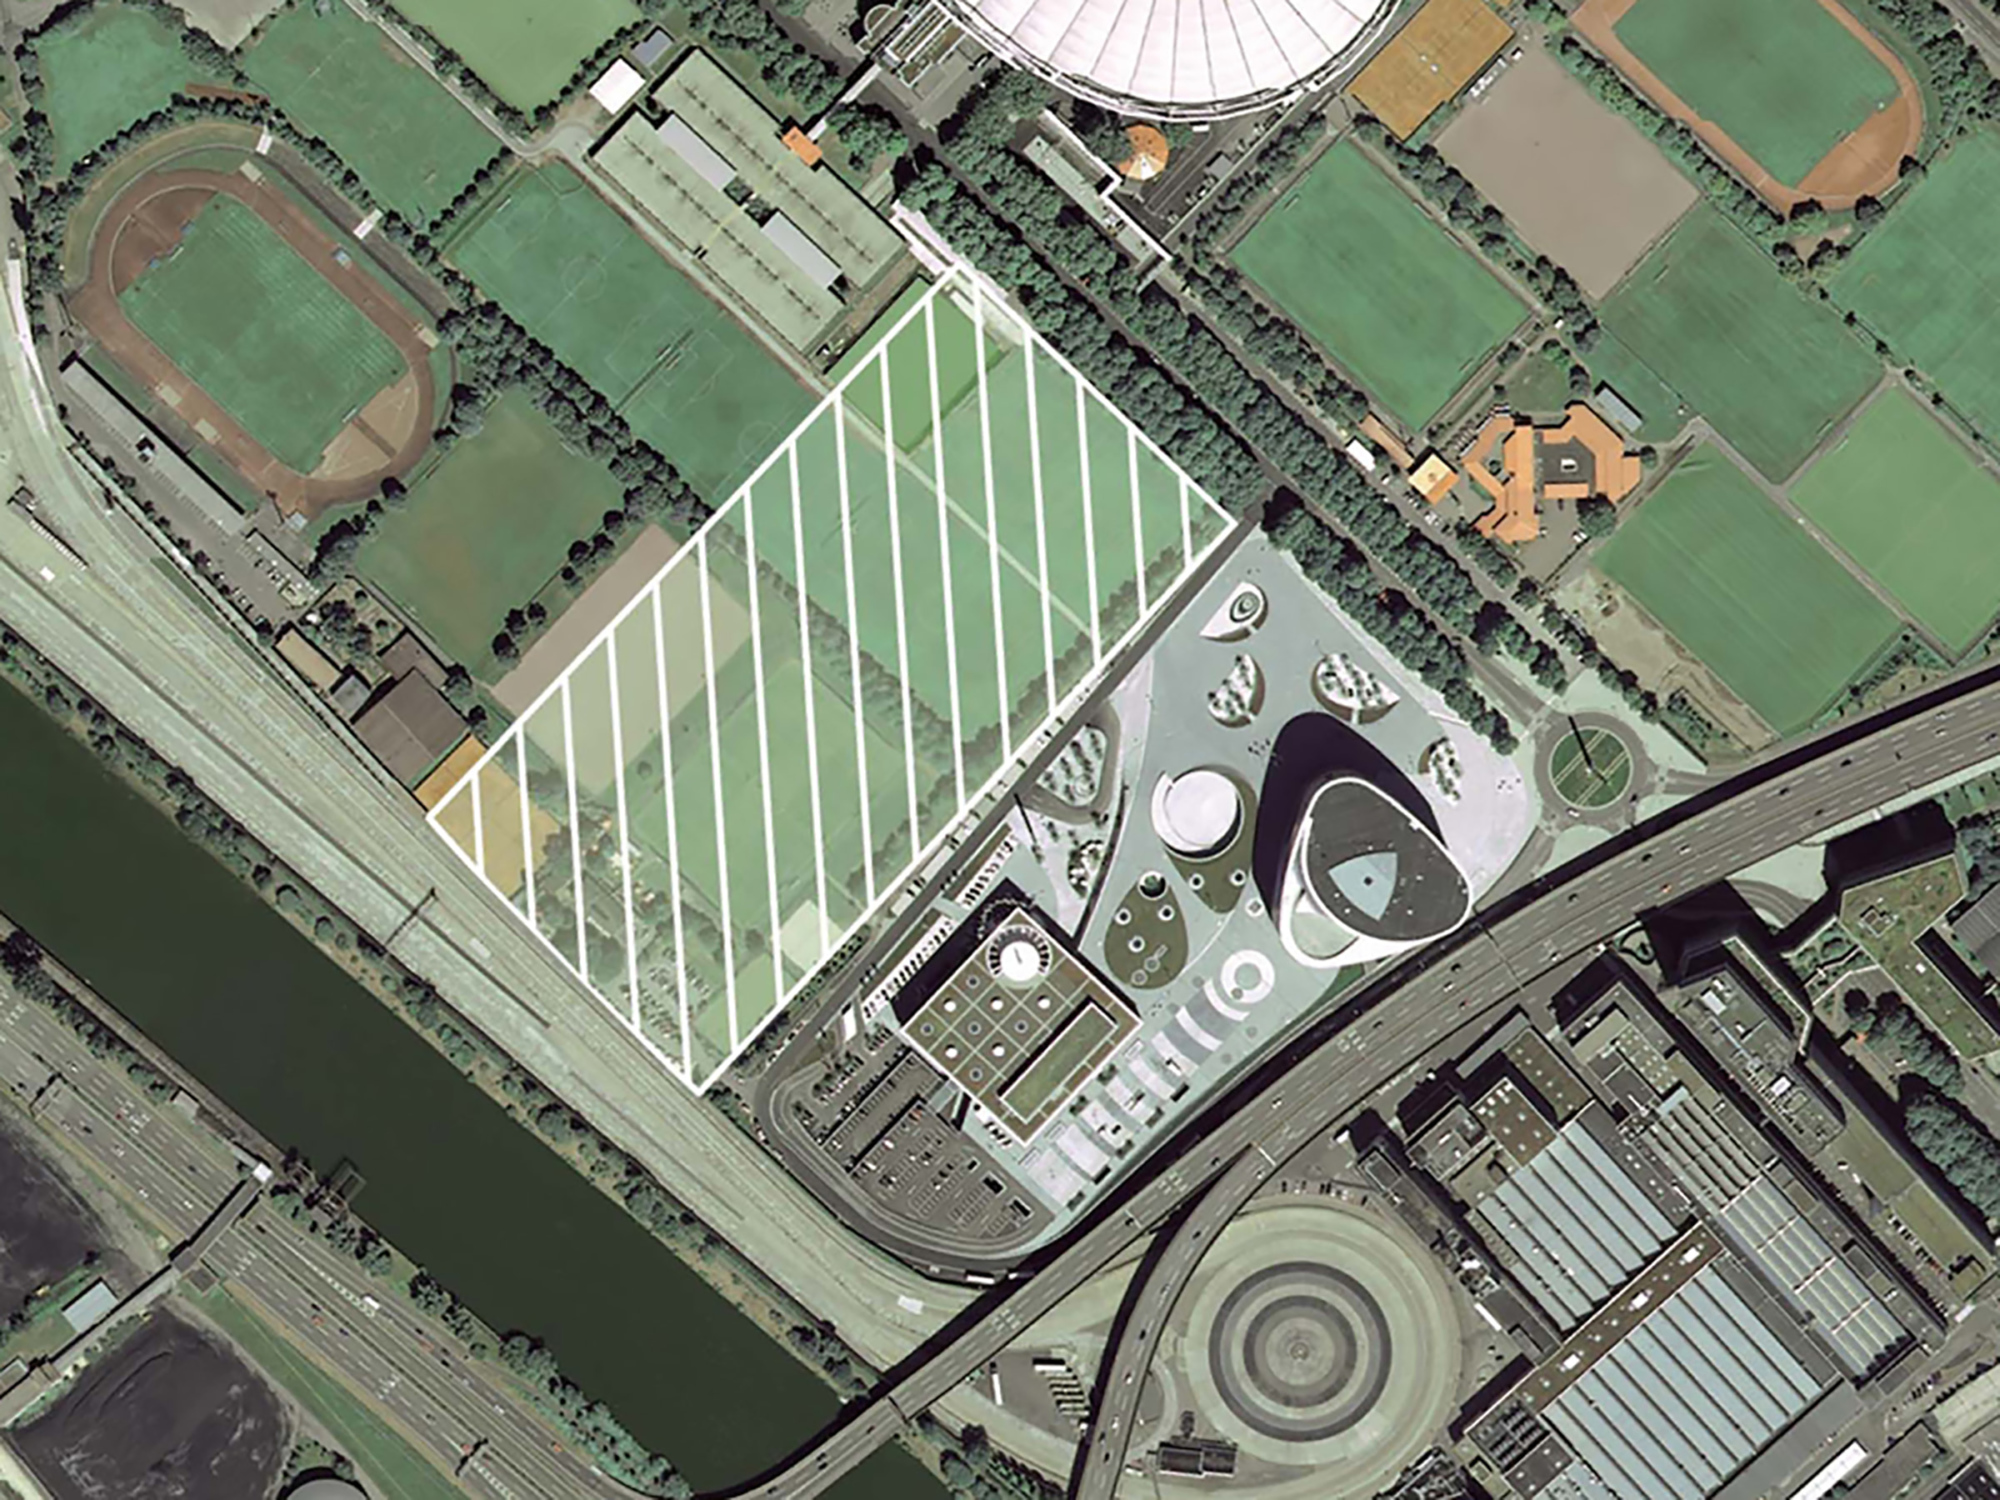 Satellite image of the MB 2.0 site.